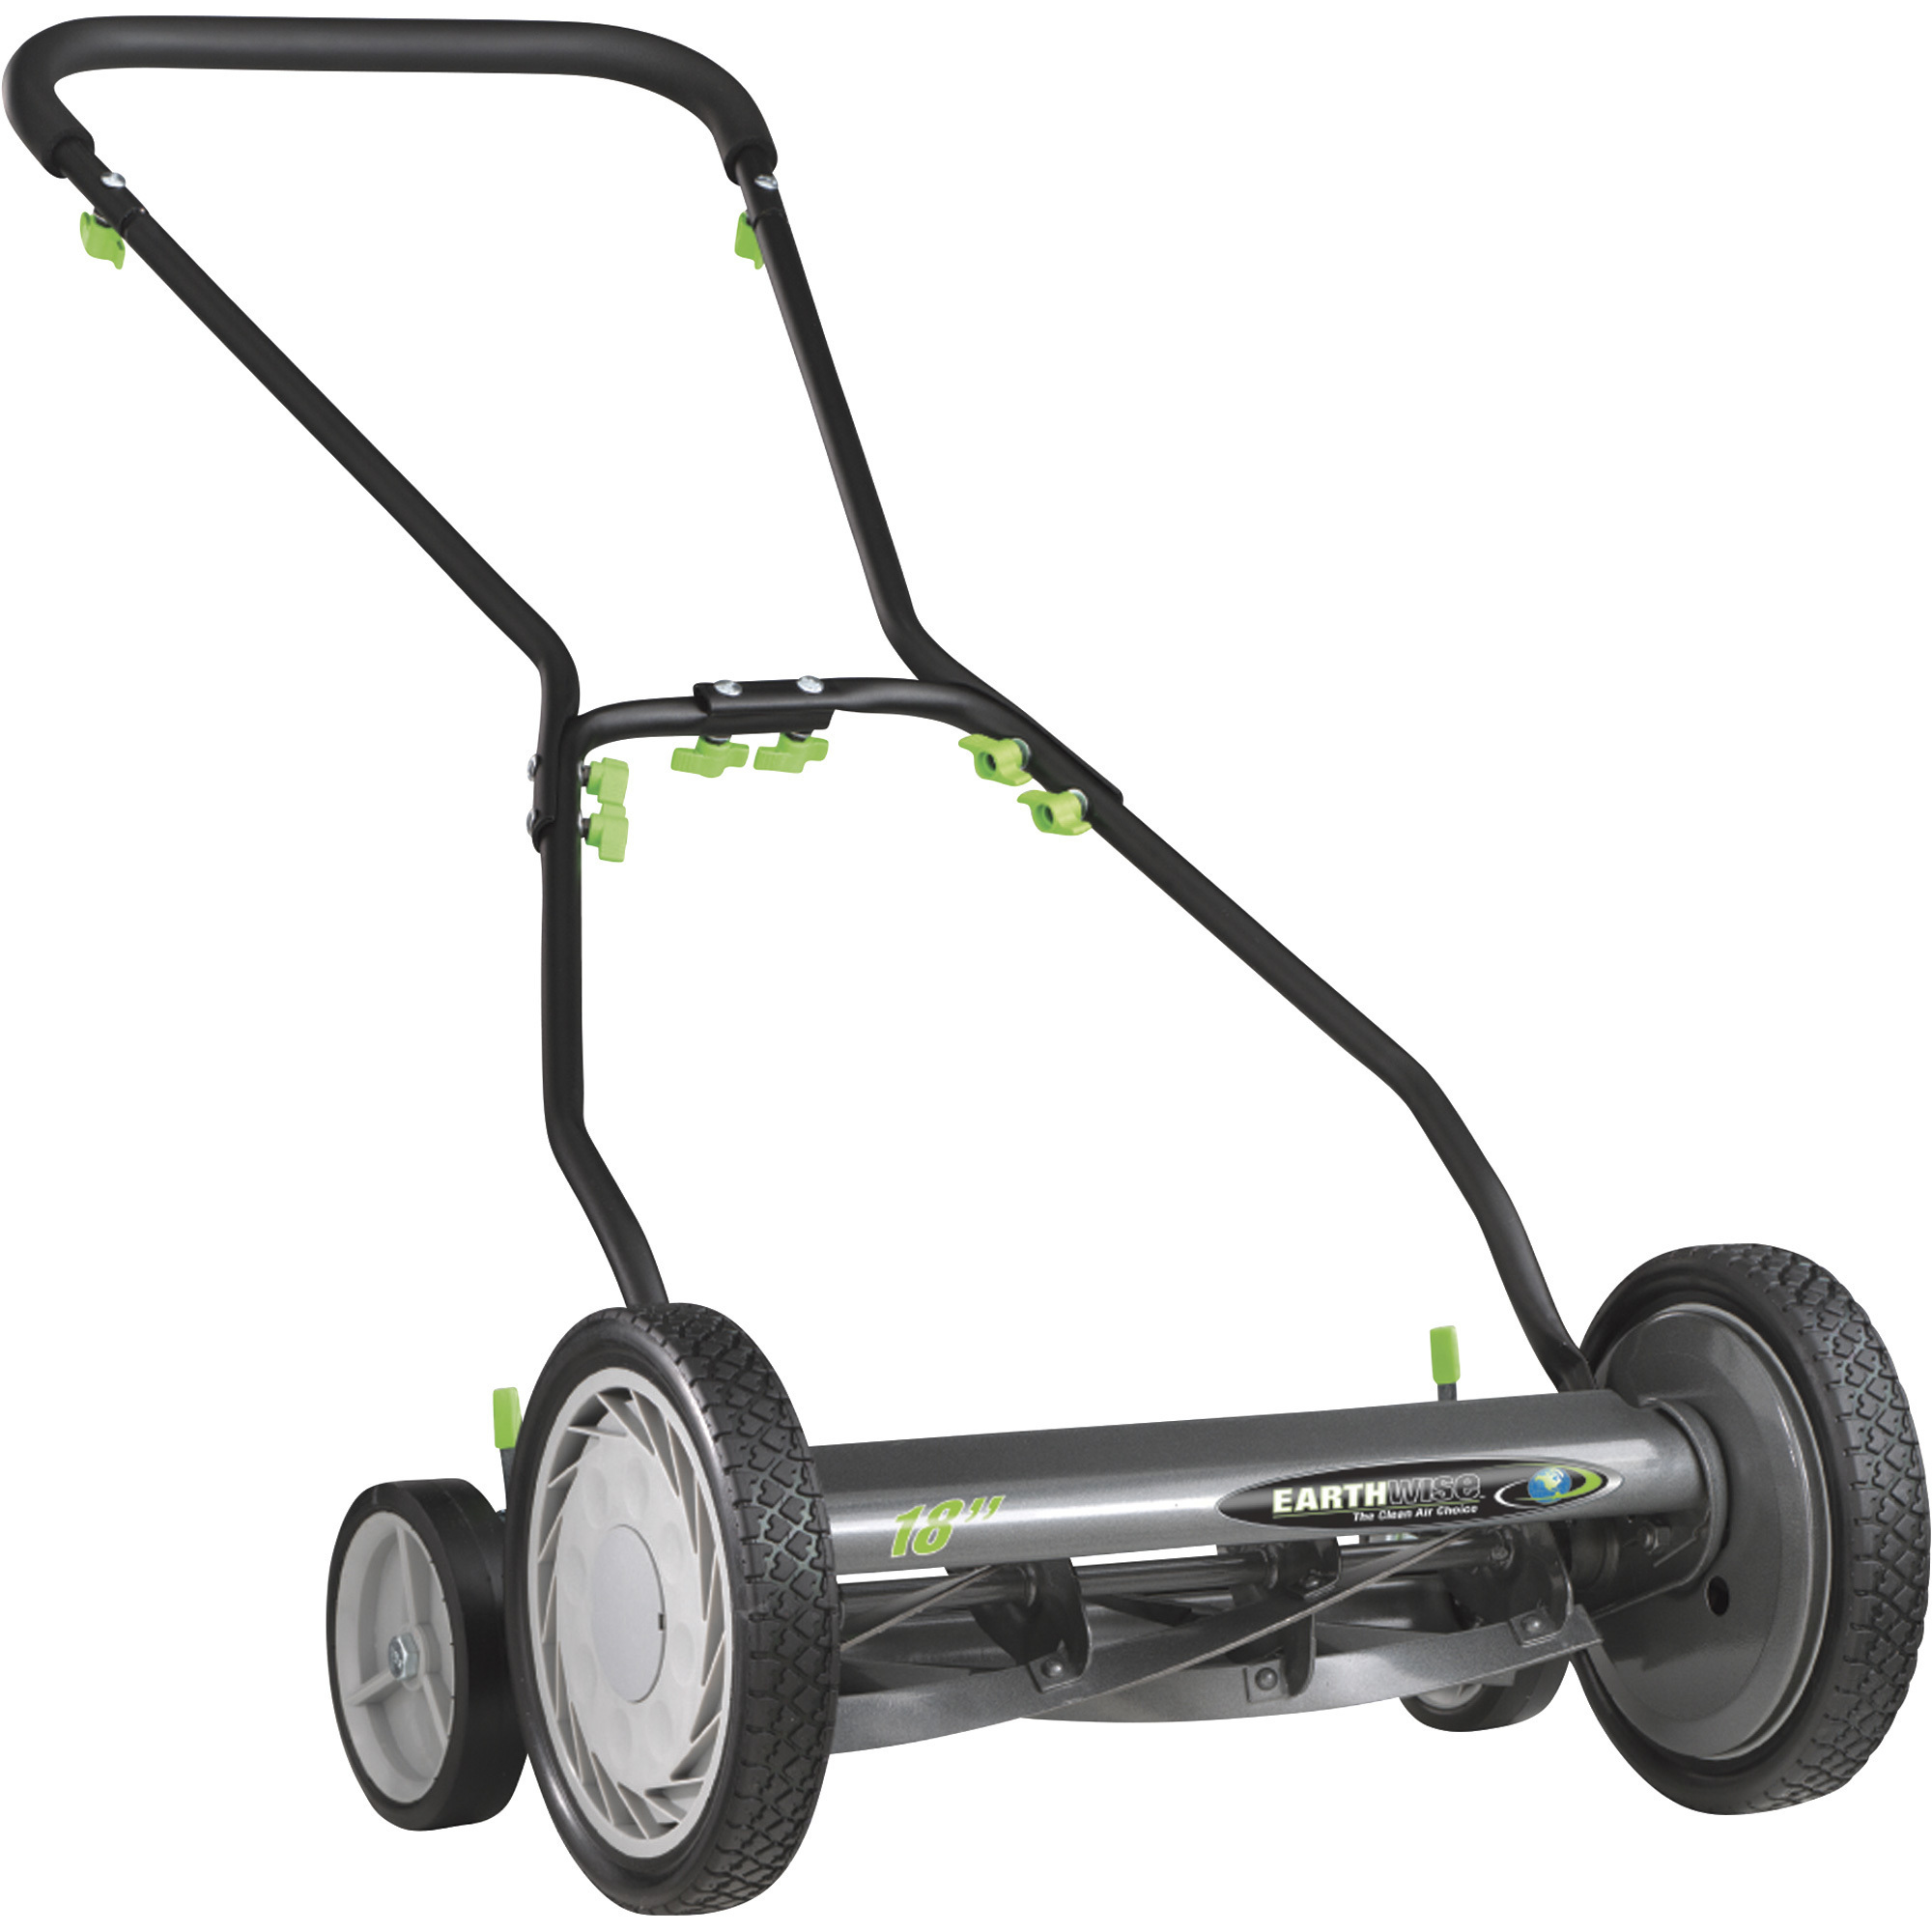 Earthwise Quiet Cut 18 in. Manual Walk Behind Nonelectric Push Reel Mower -  California Compliant 515-18 - The Home Depot